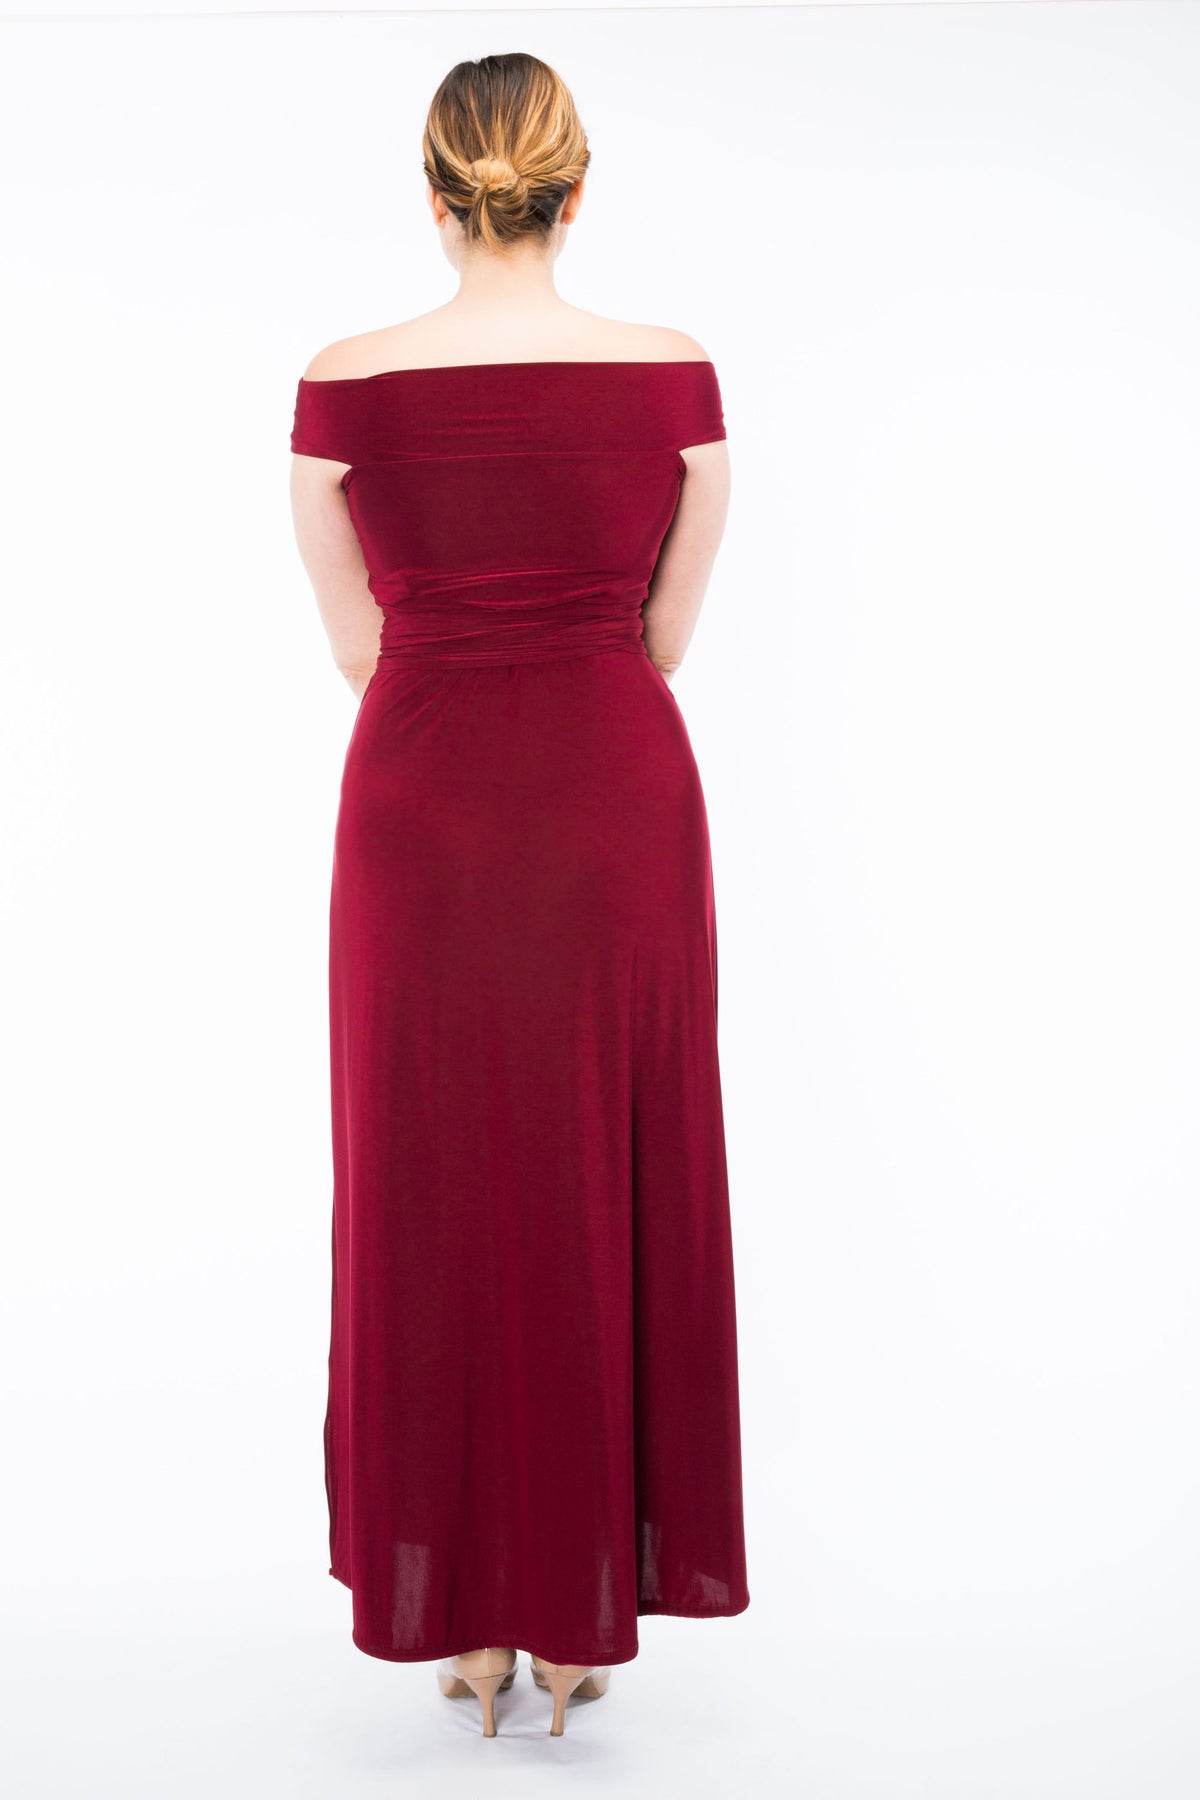 Diane Kroe Convertible Holiday Maxi Dress back view full size